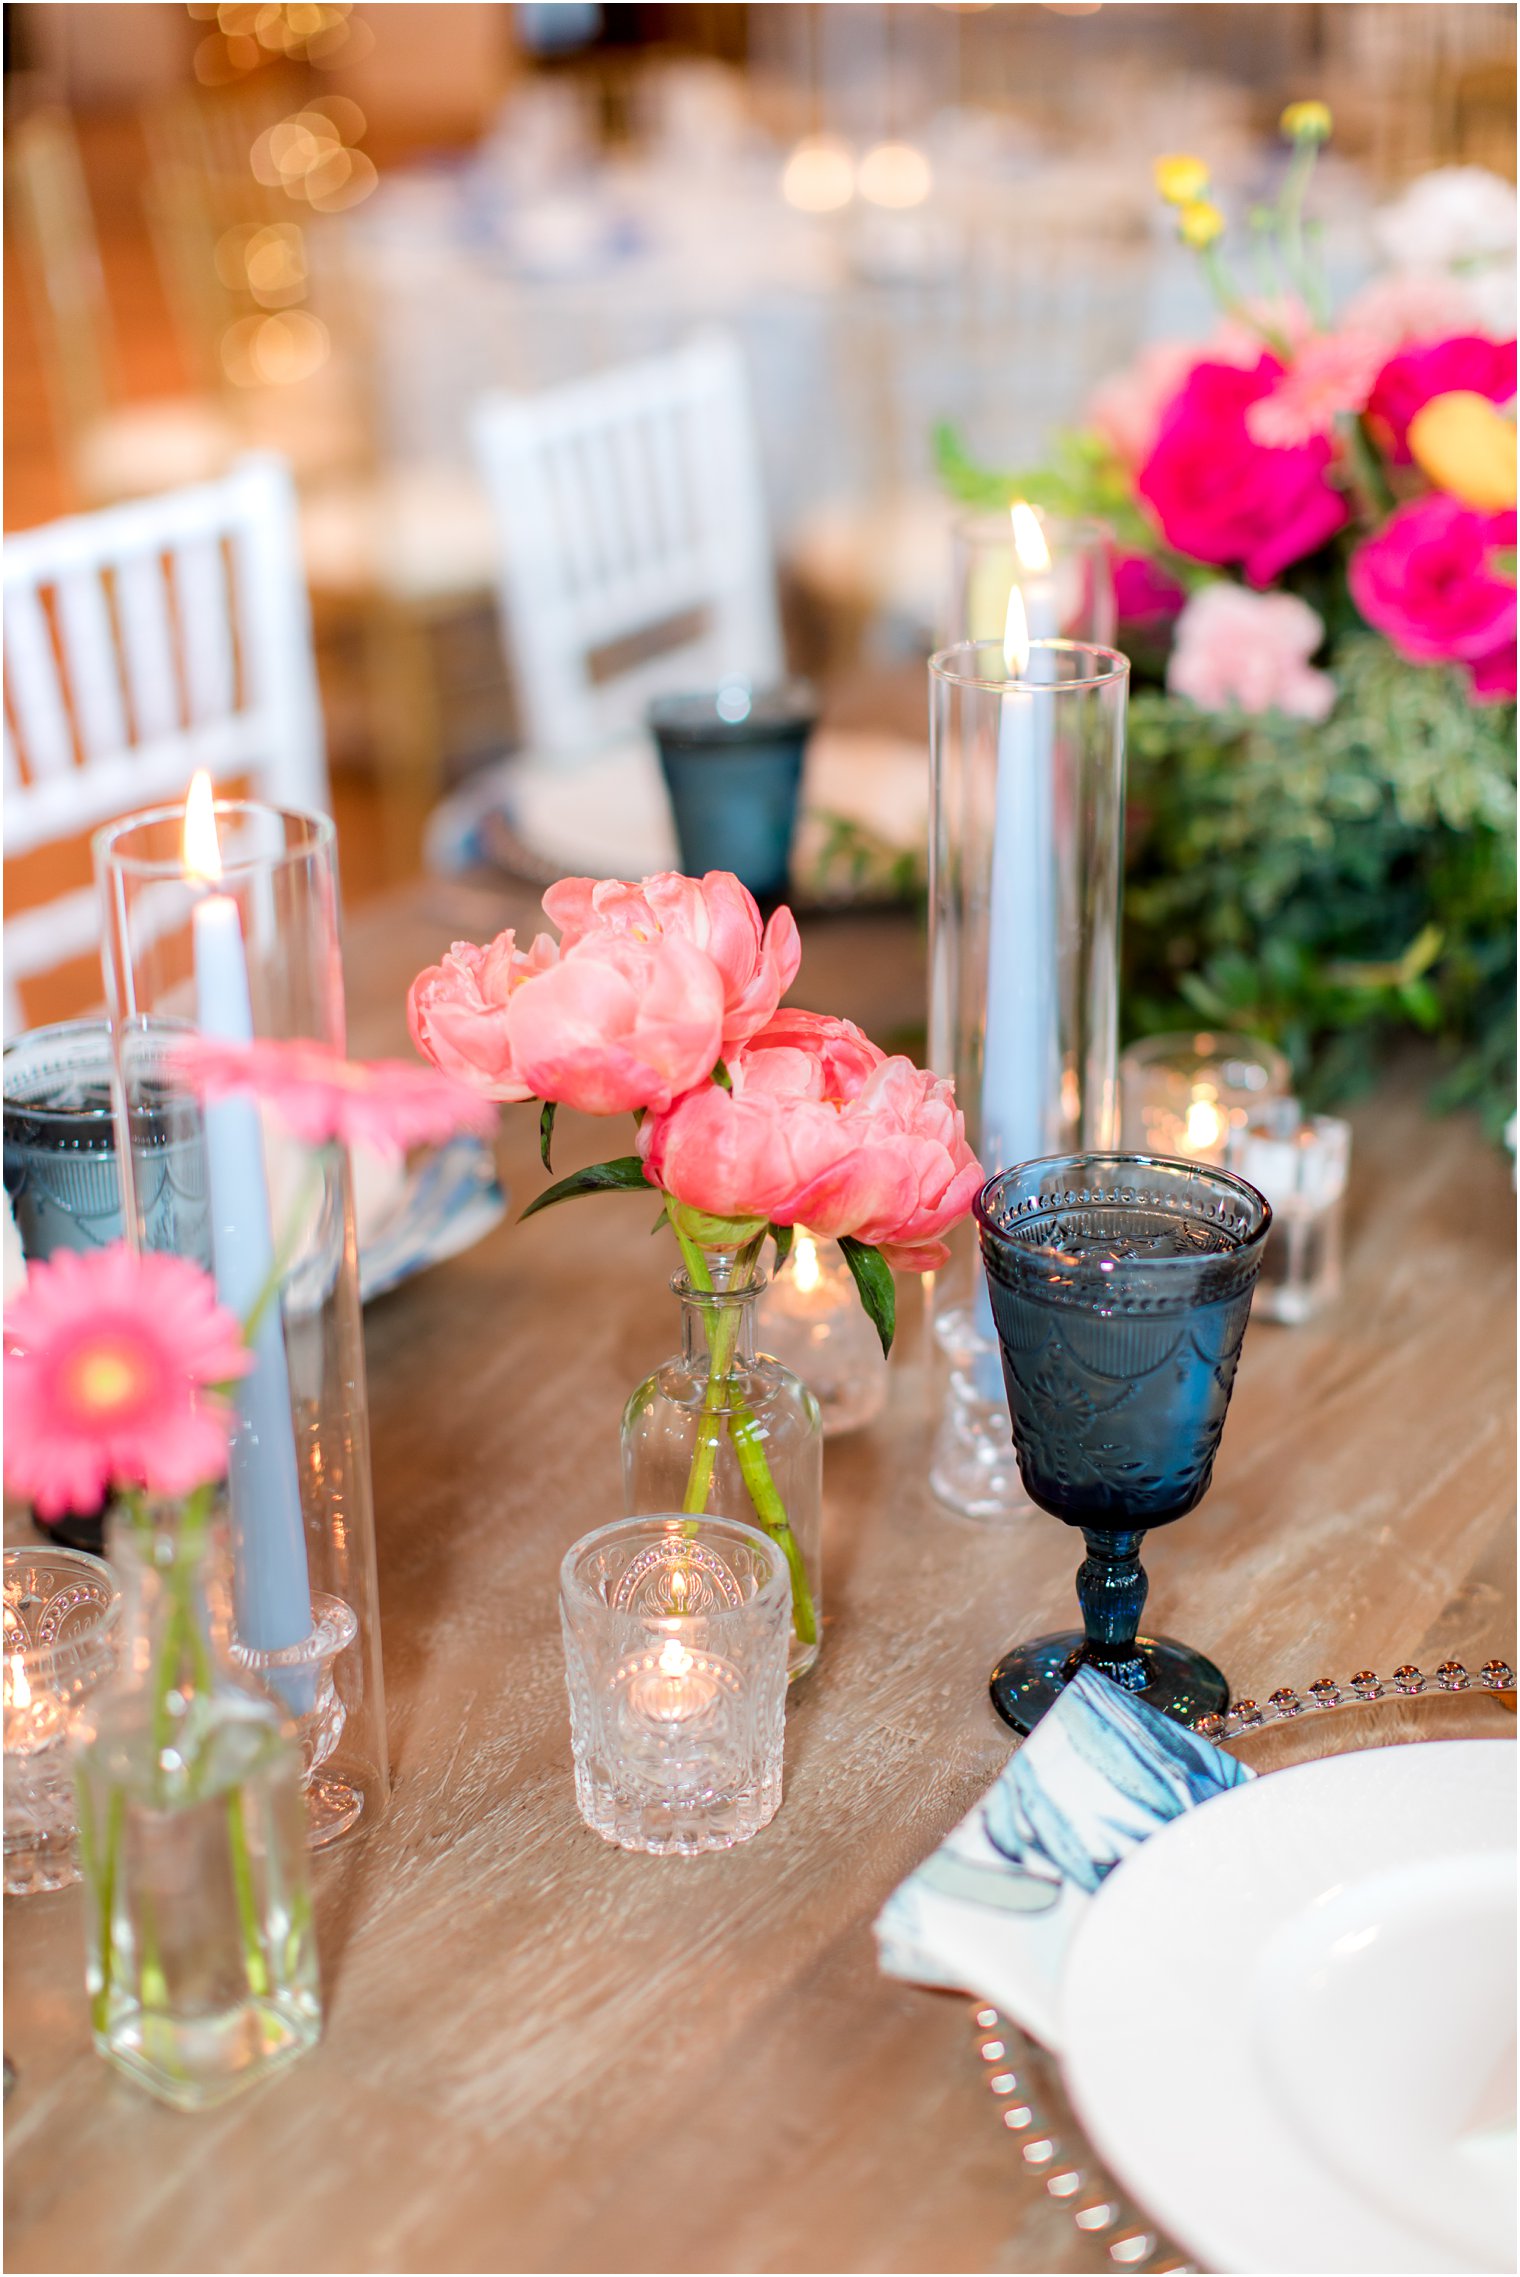 place settings with peonies and vintage glassware for Rosemont Manor wedding reception 